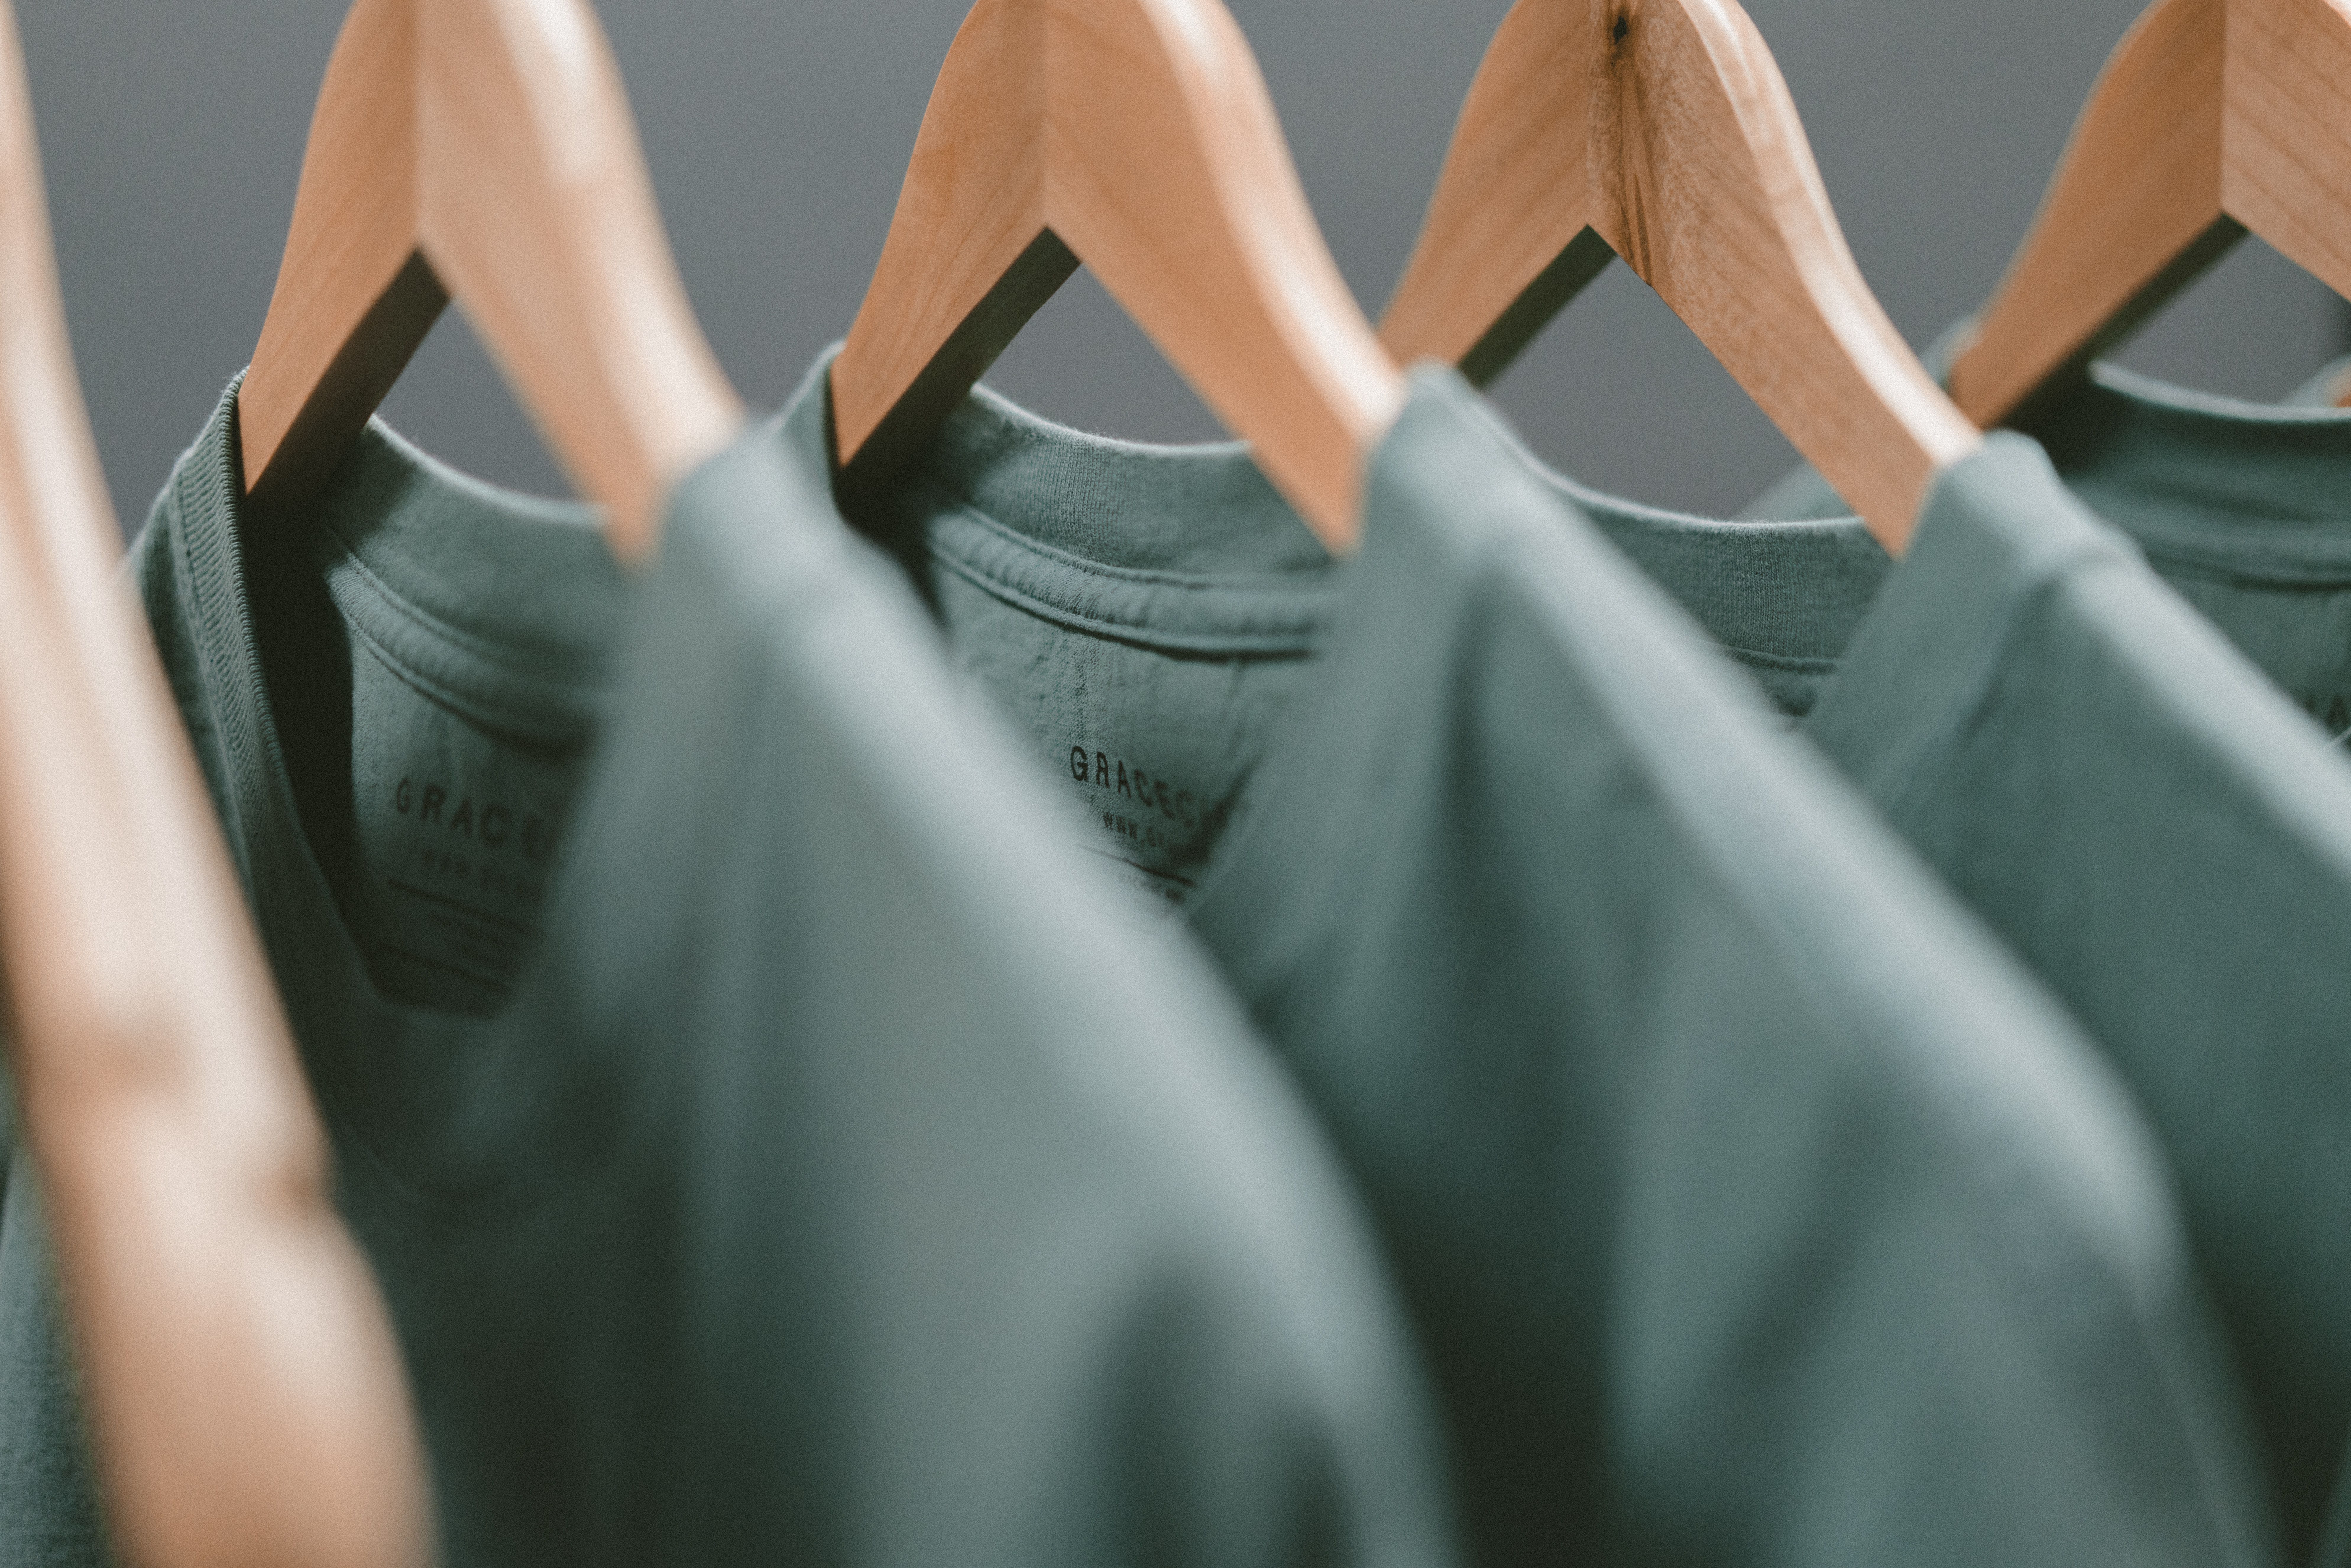 multiple green shirts on cloth hangers